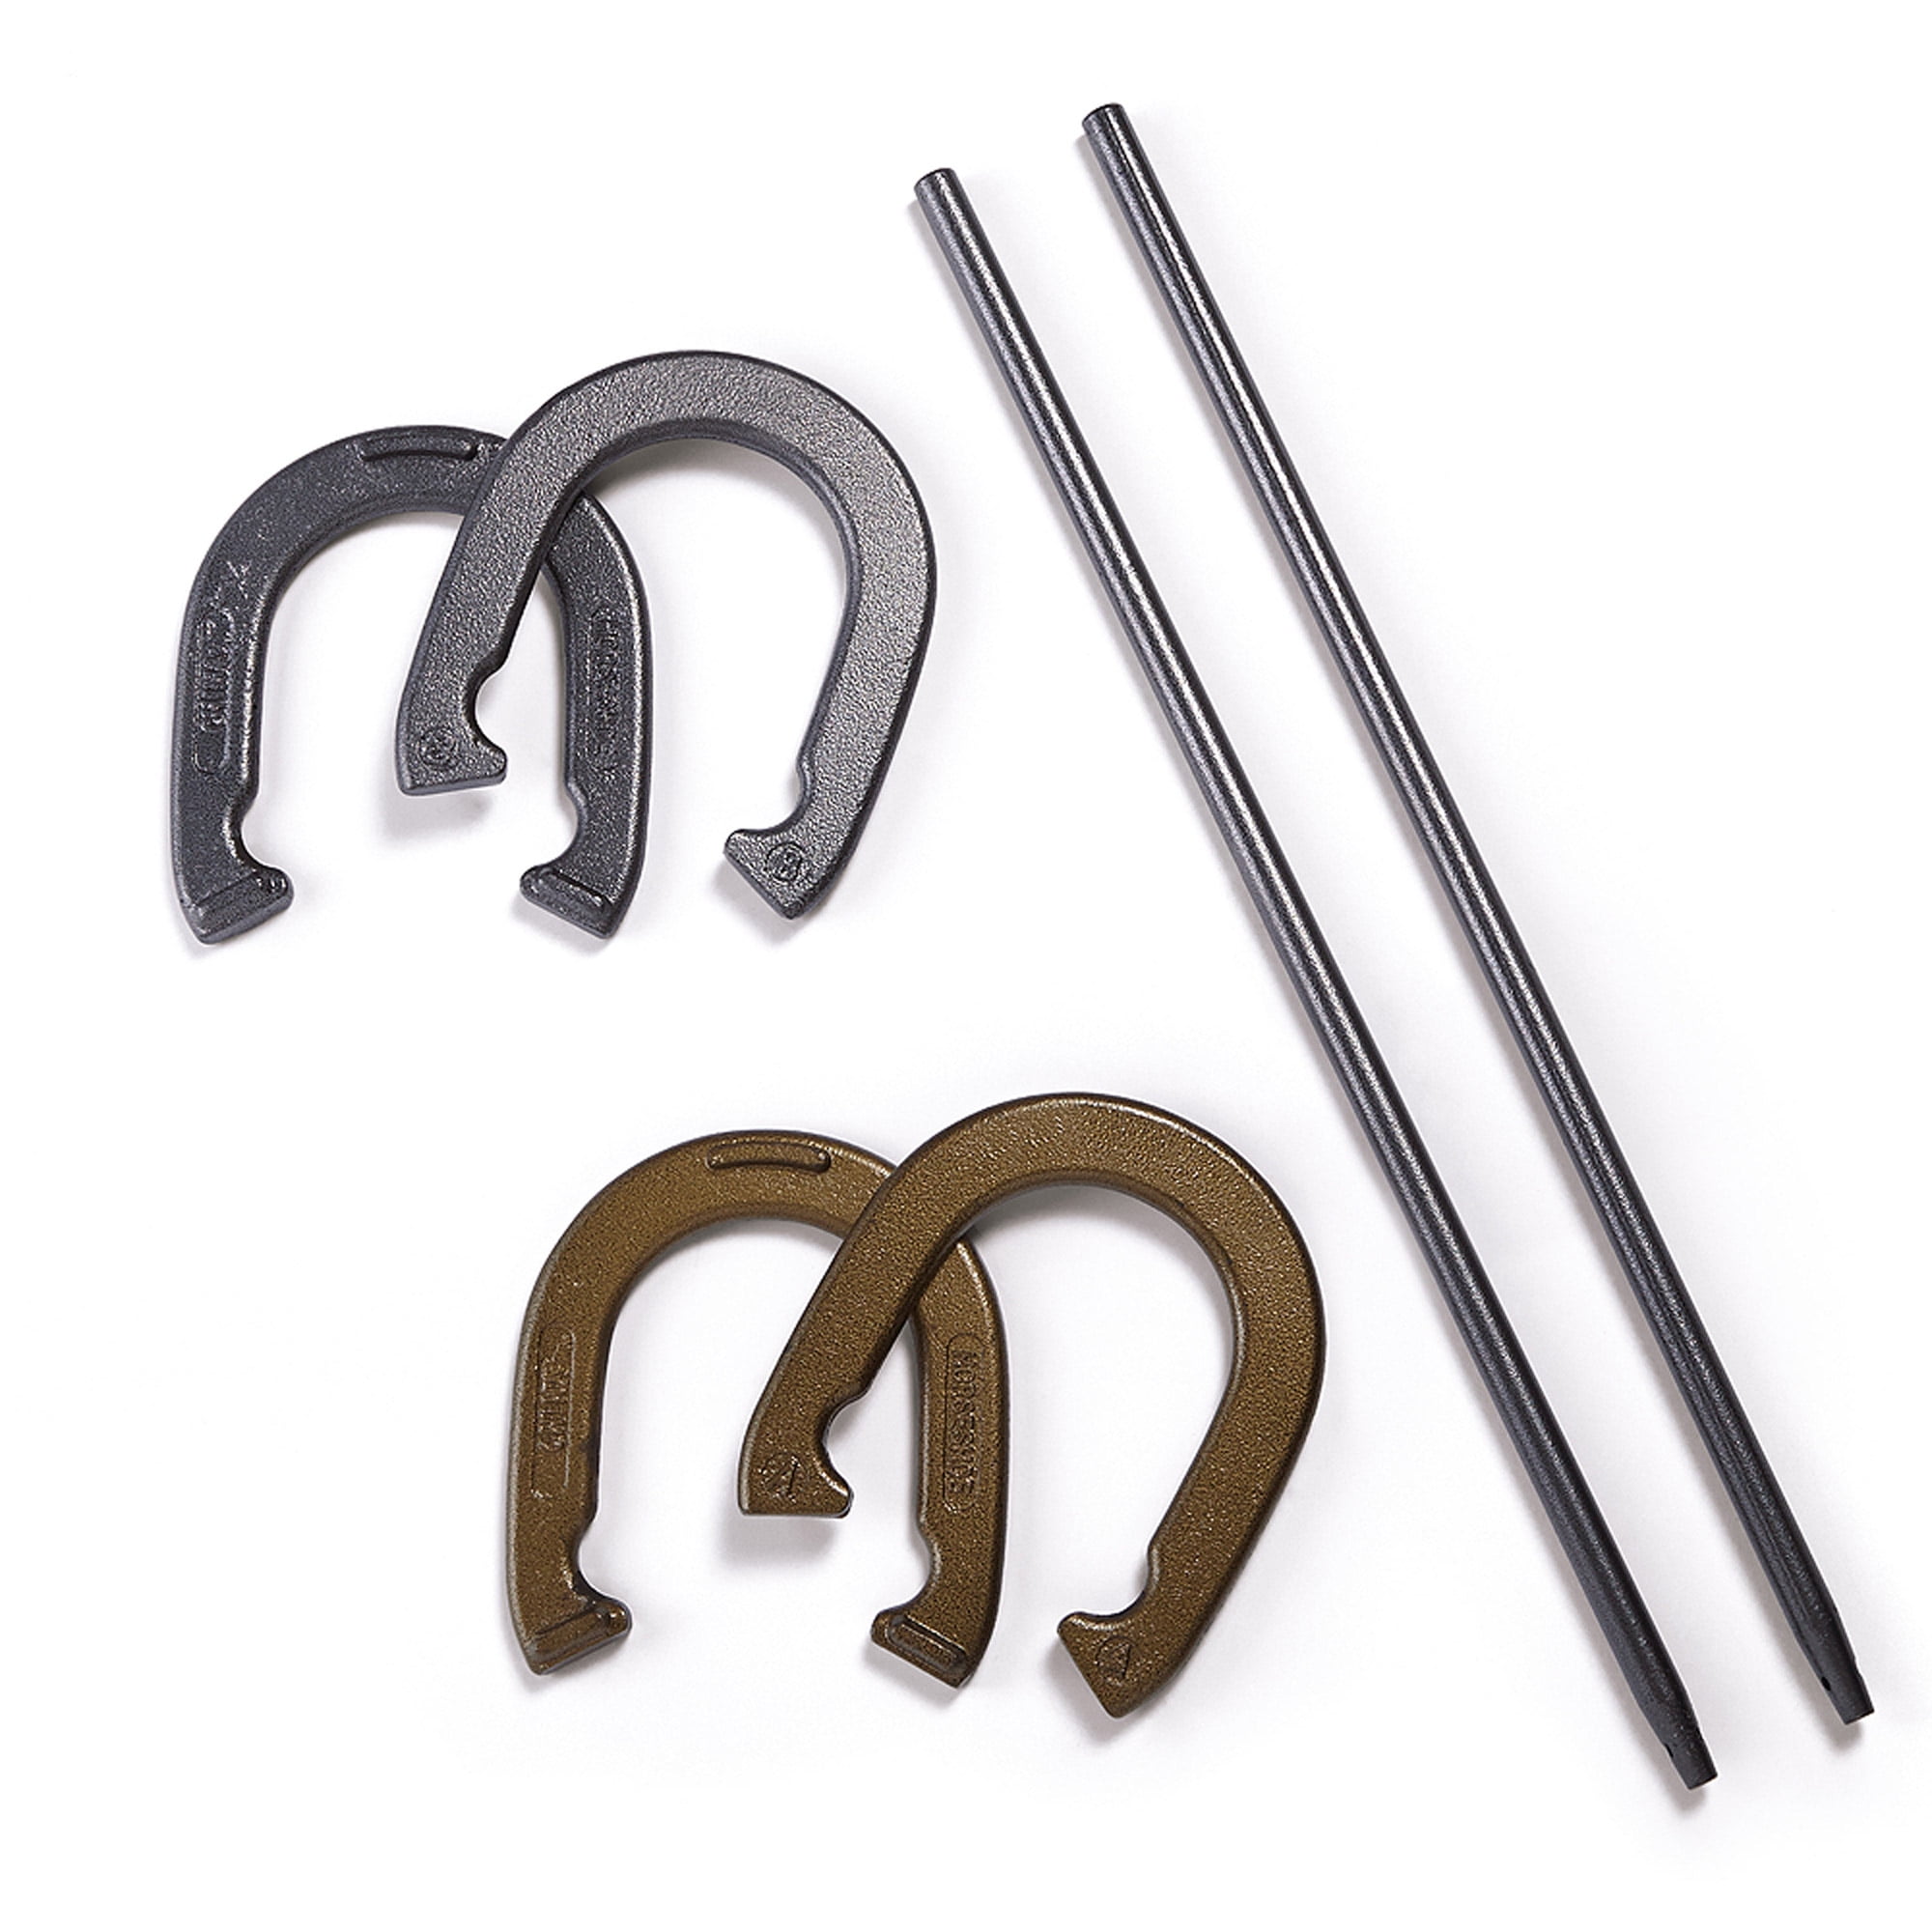 Premium Reinforced Carbon Steel Horseshoe Set with Carry Bag by Trademark Innovations 